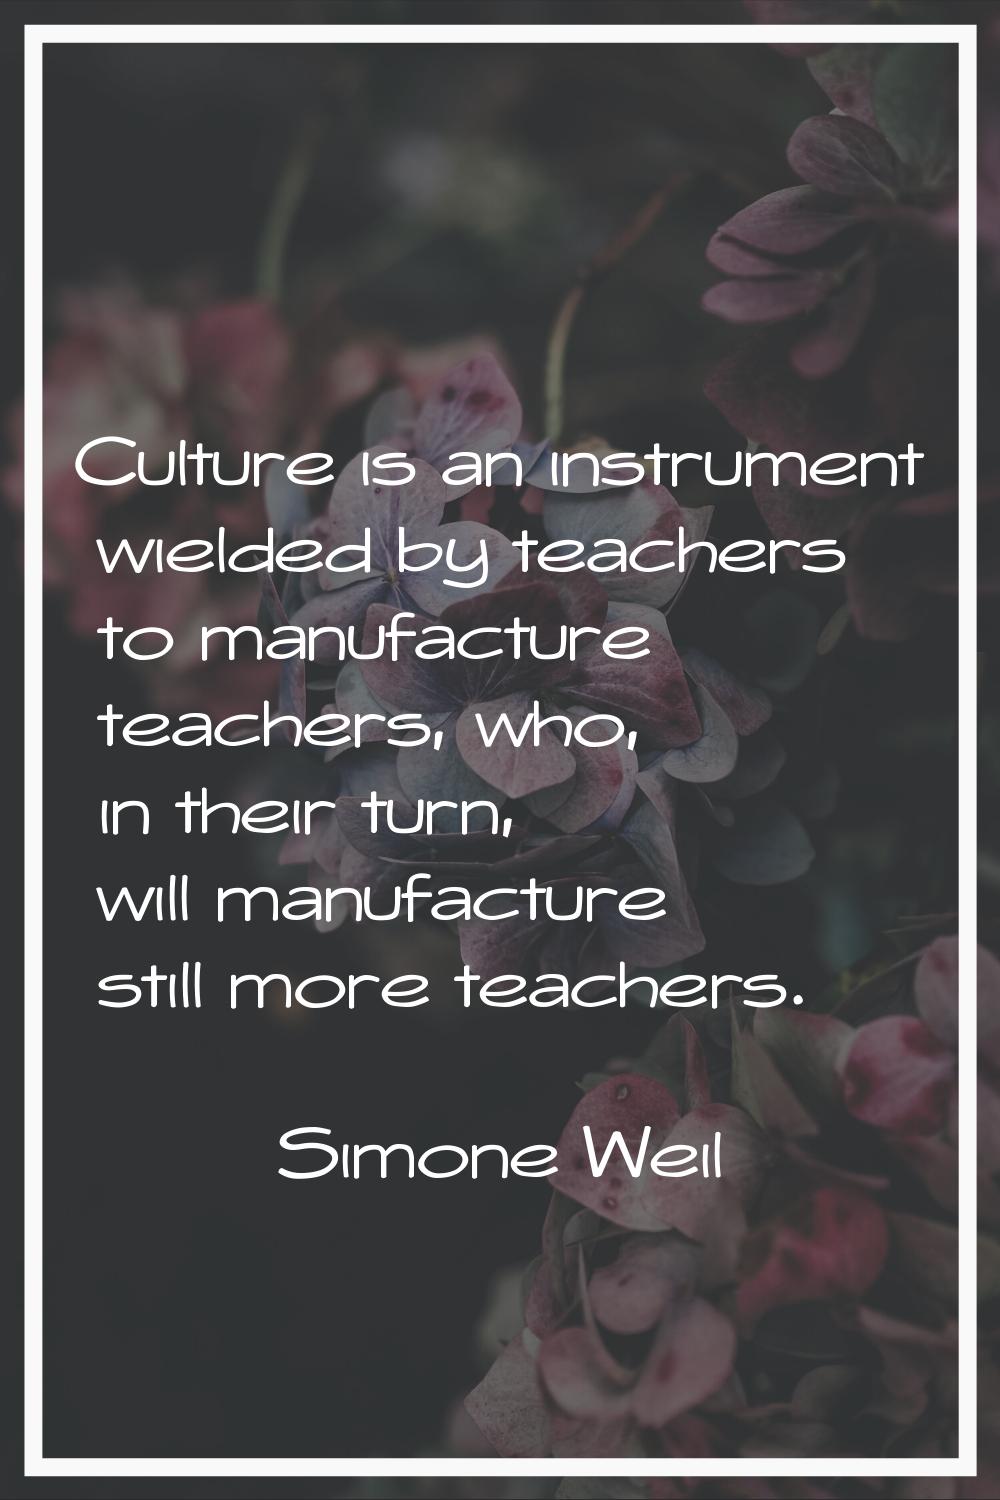 Culture is an instrument wielded by teachers to manufacture teachers, who, in their turn, will manu